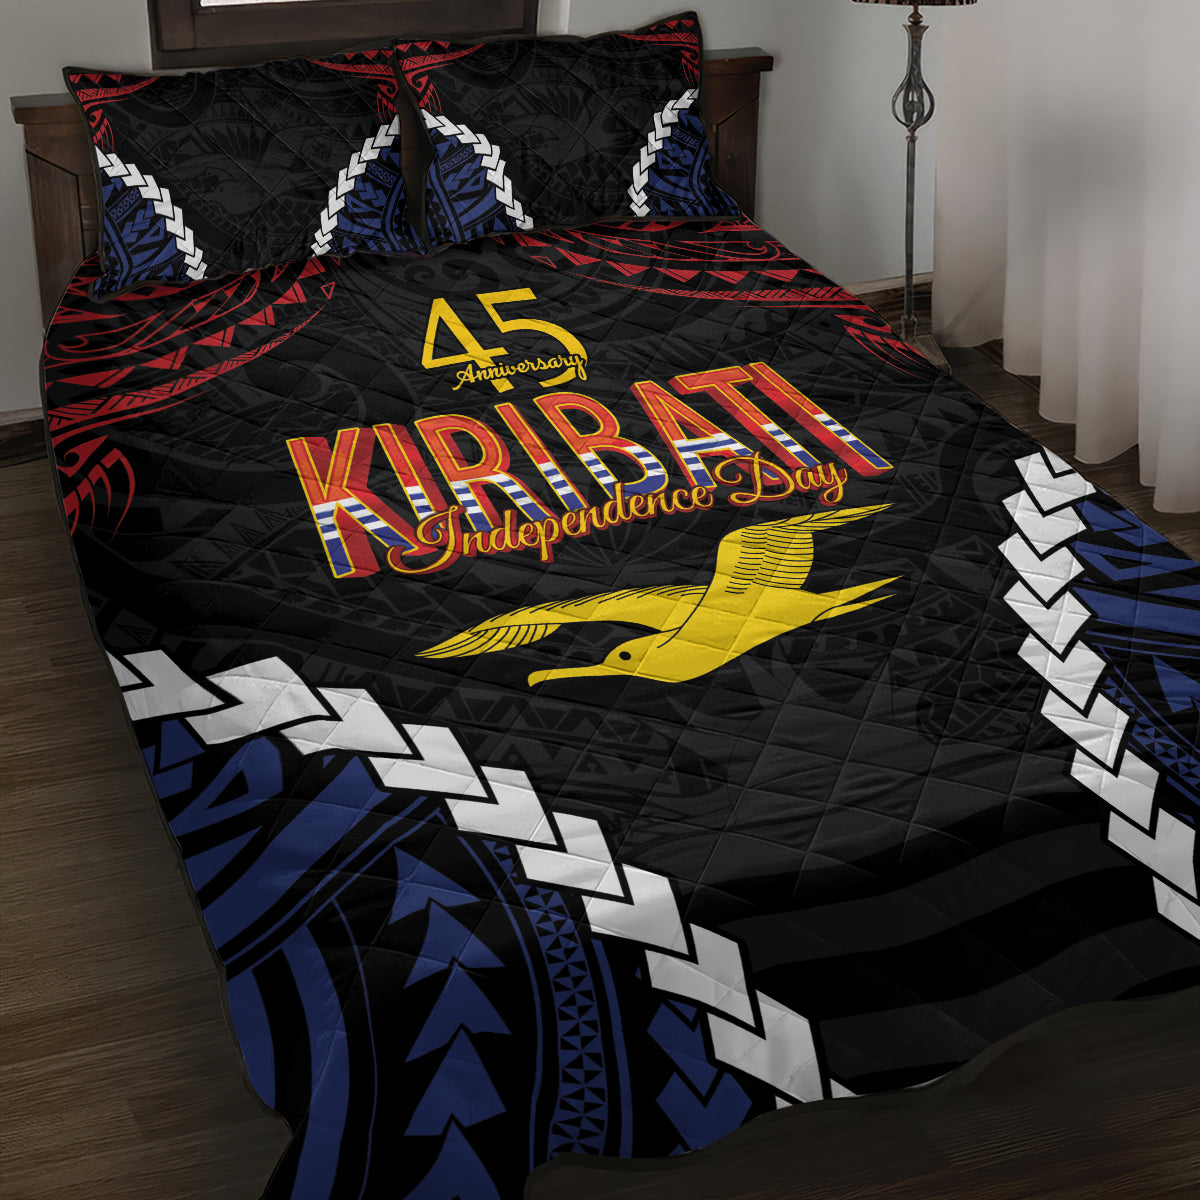 Kiribati 45th Anniversary Independence Day Quilt Bed Set Since 1979